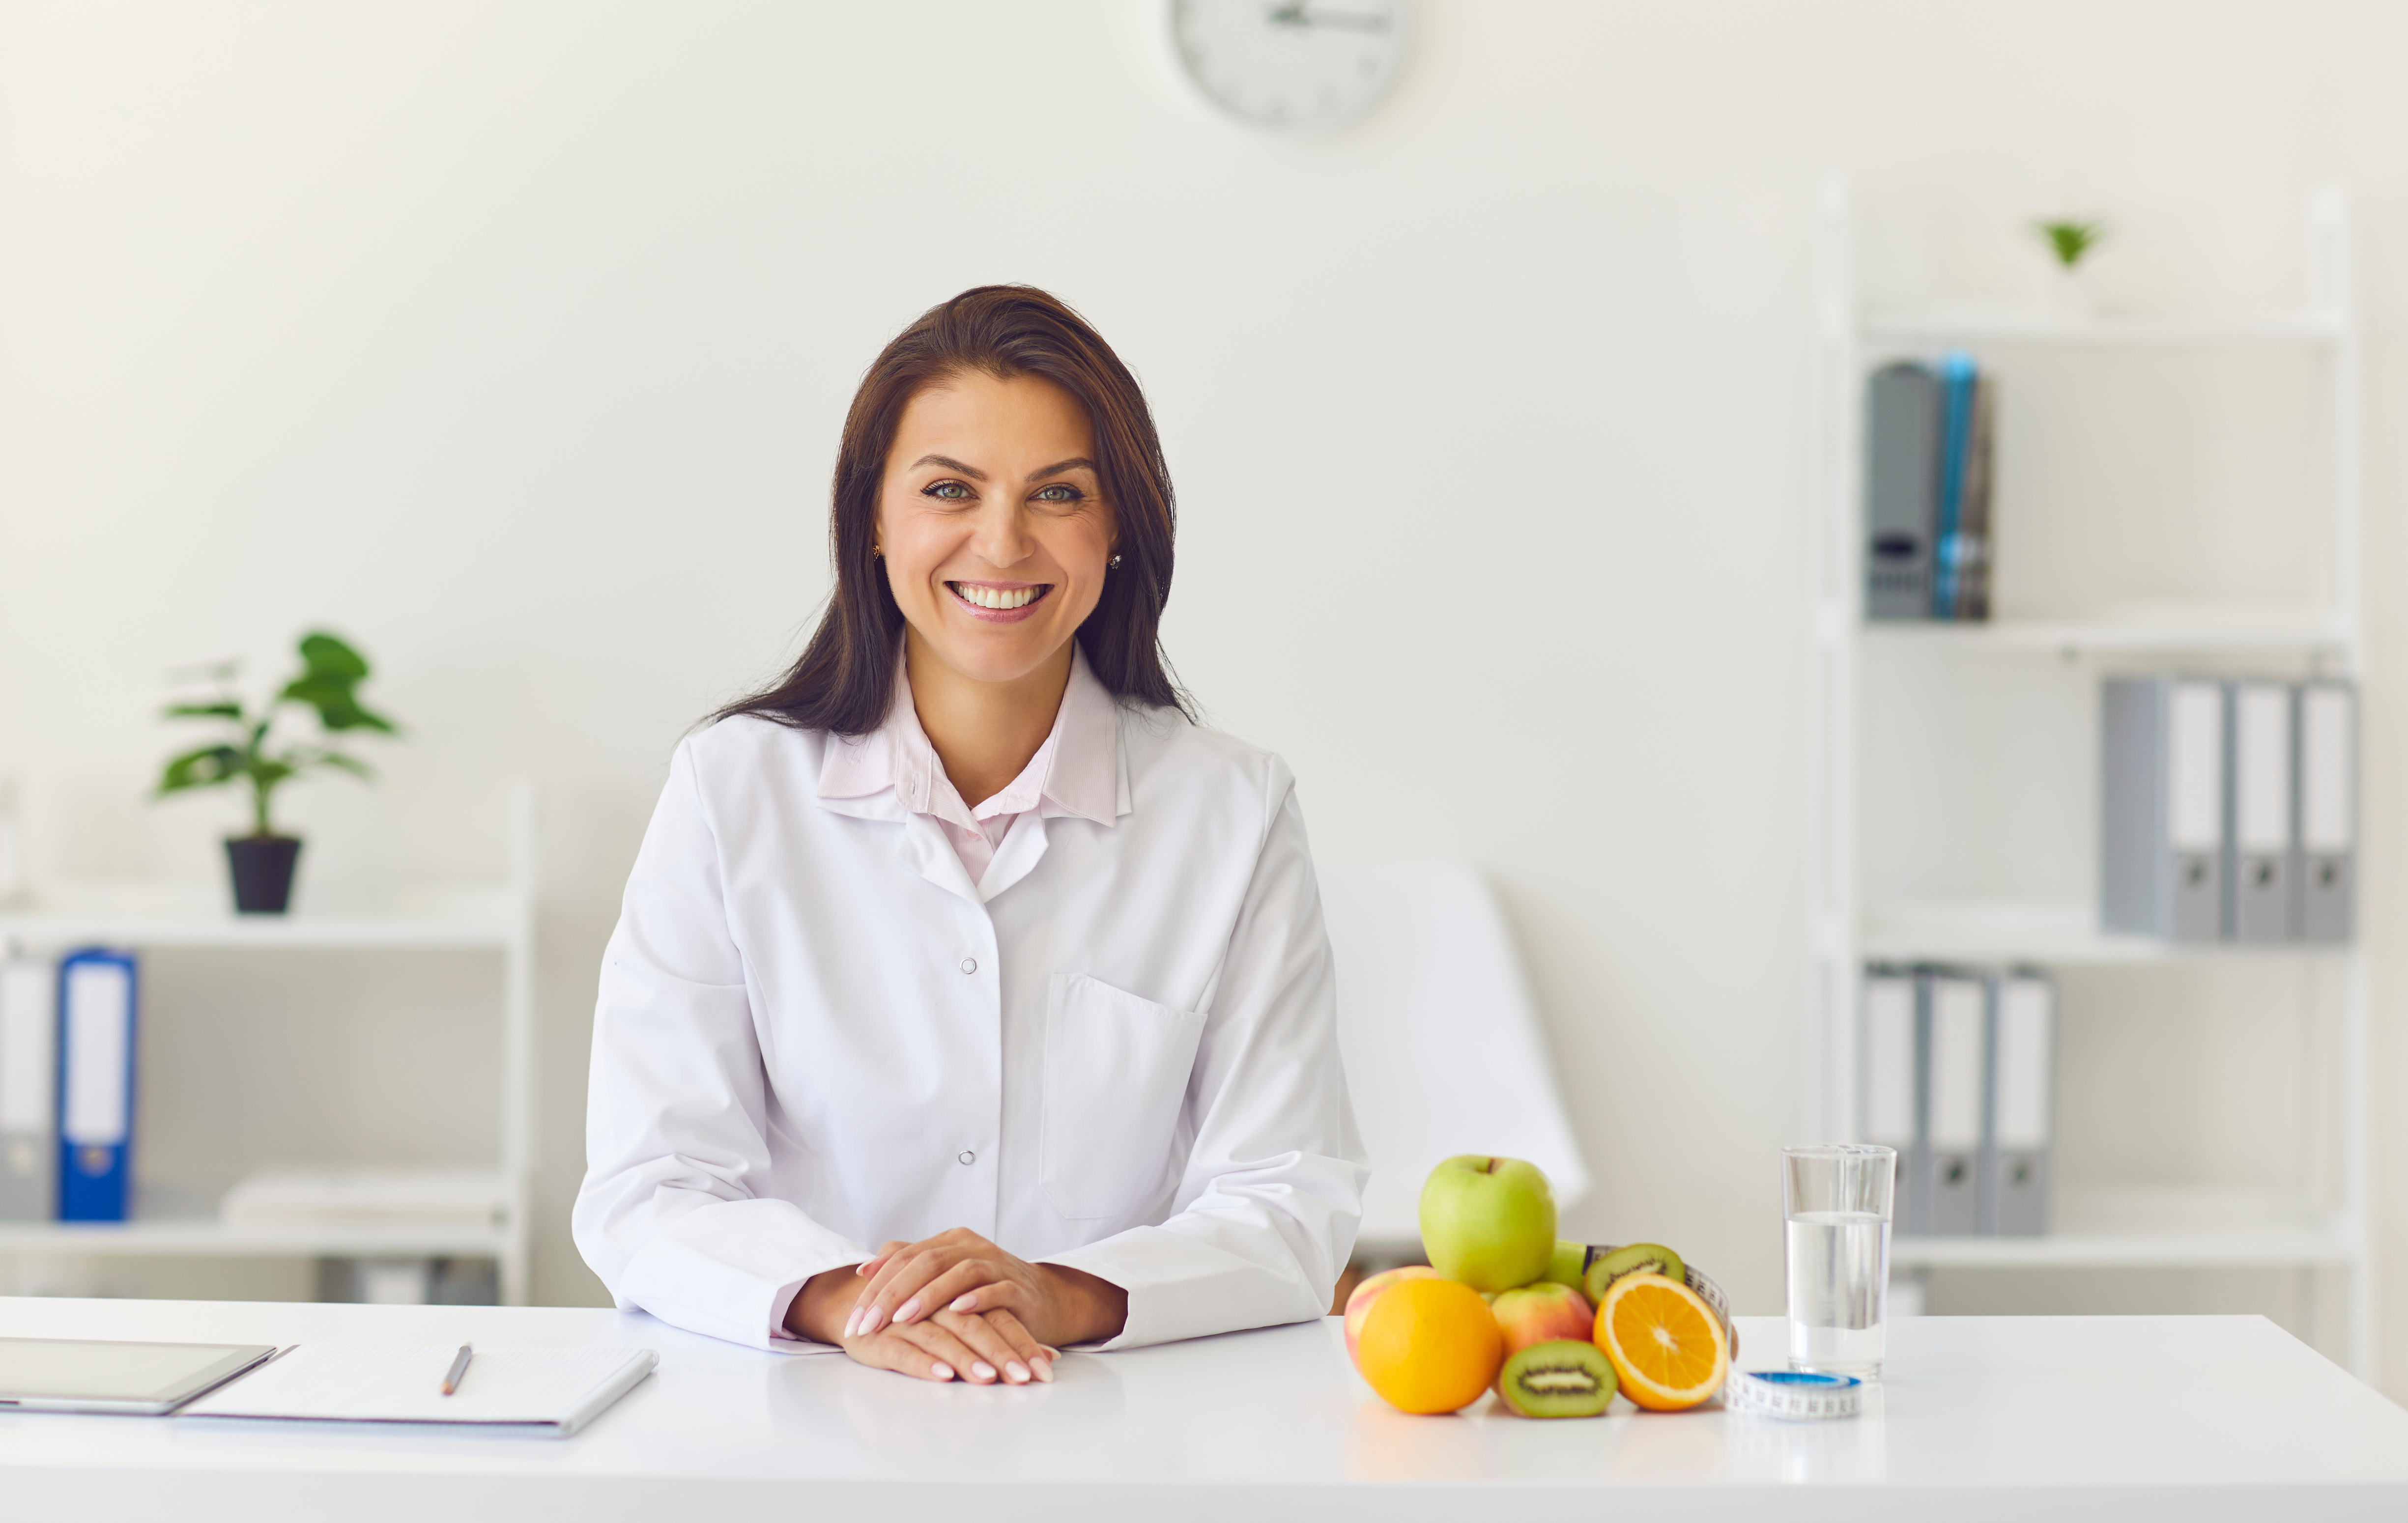 The image shows a doctor with a warm smile sitting at a table. On the table, there are various fruits, a glass of water, and a measuring tape. The presence of these items signifies the focus on healthy eating, hydration, and tracking progress in weight loss at the hormone replacement therapy clinic.